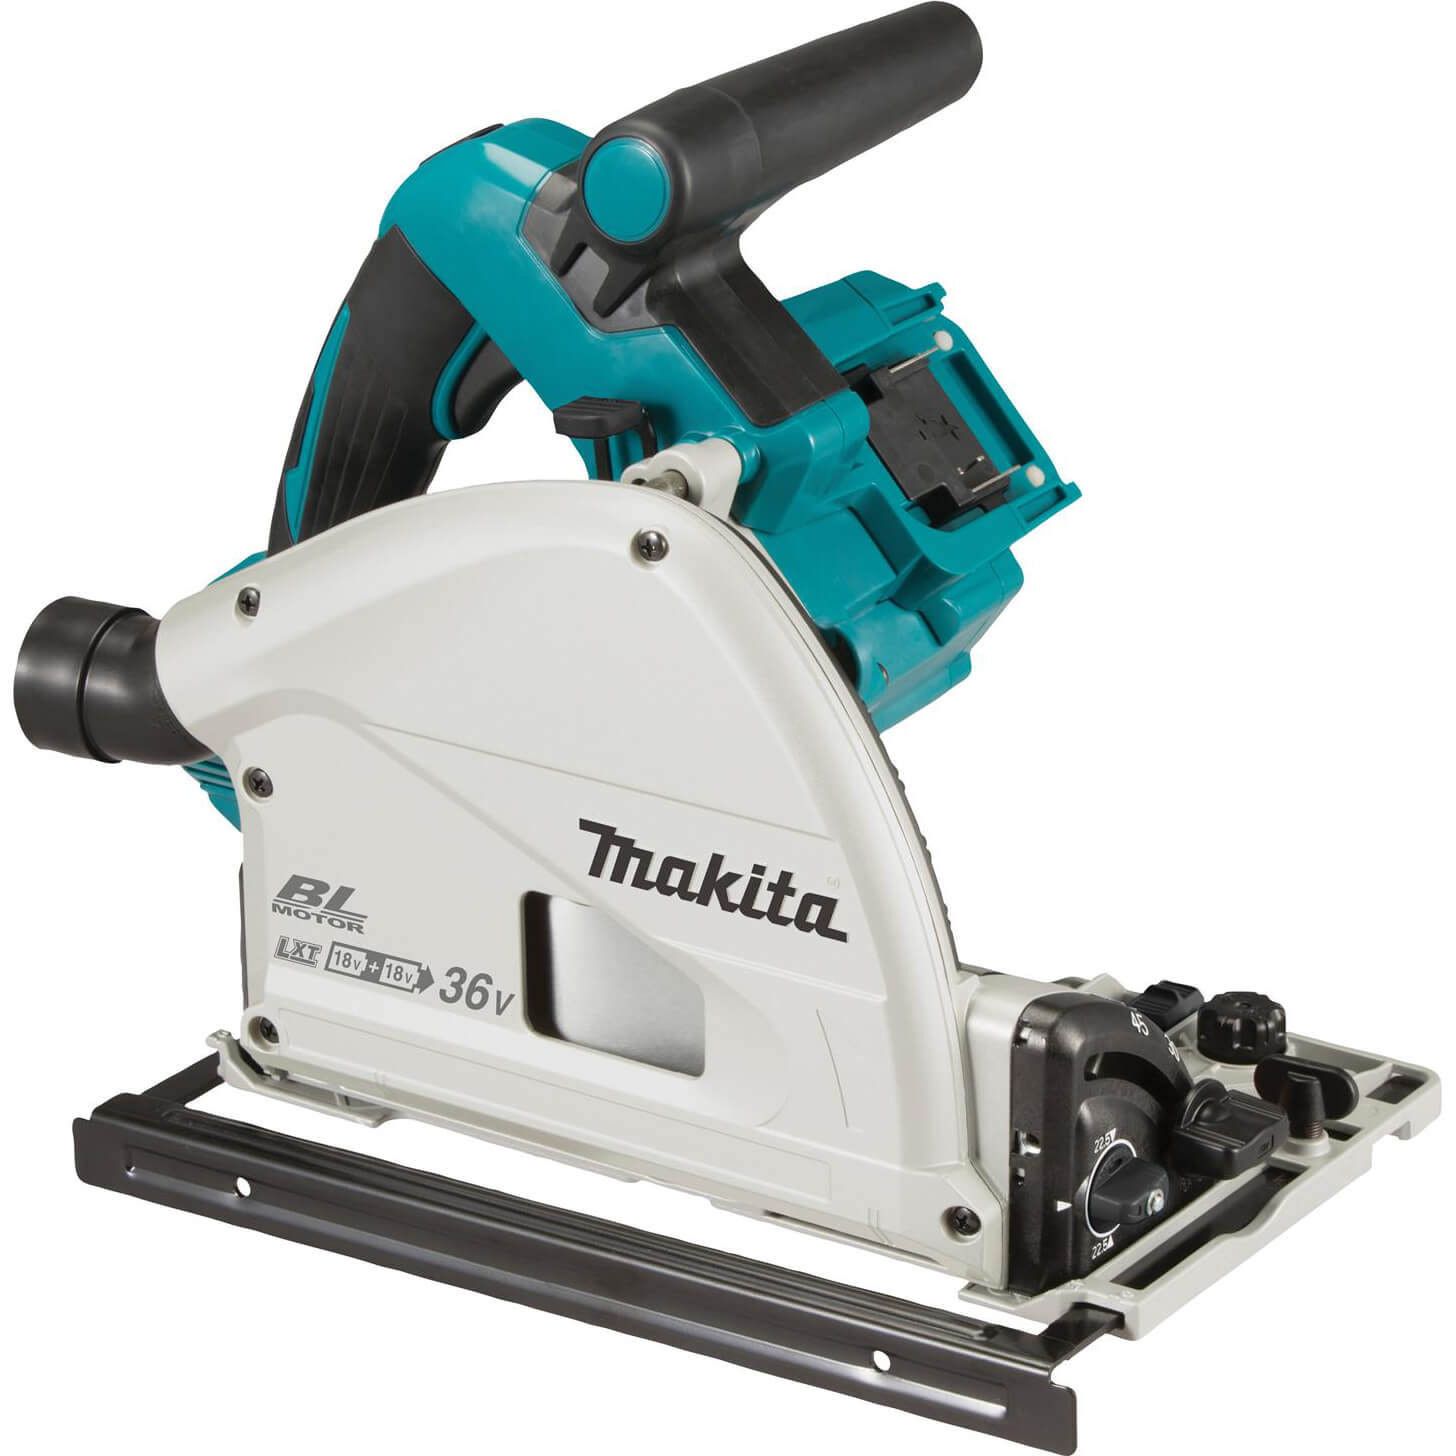 Makita DSP600 Twin 18v LXT Cordless Brushless Plunge Saw 165mm No Batteries No Charger Case